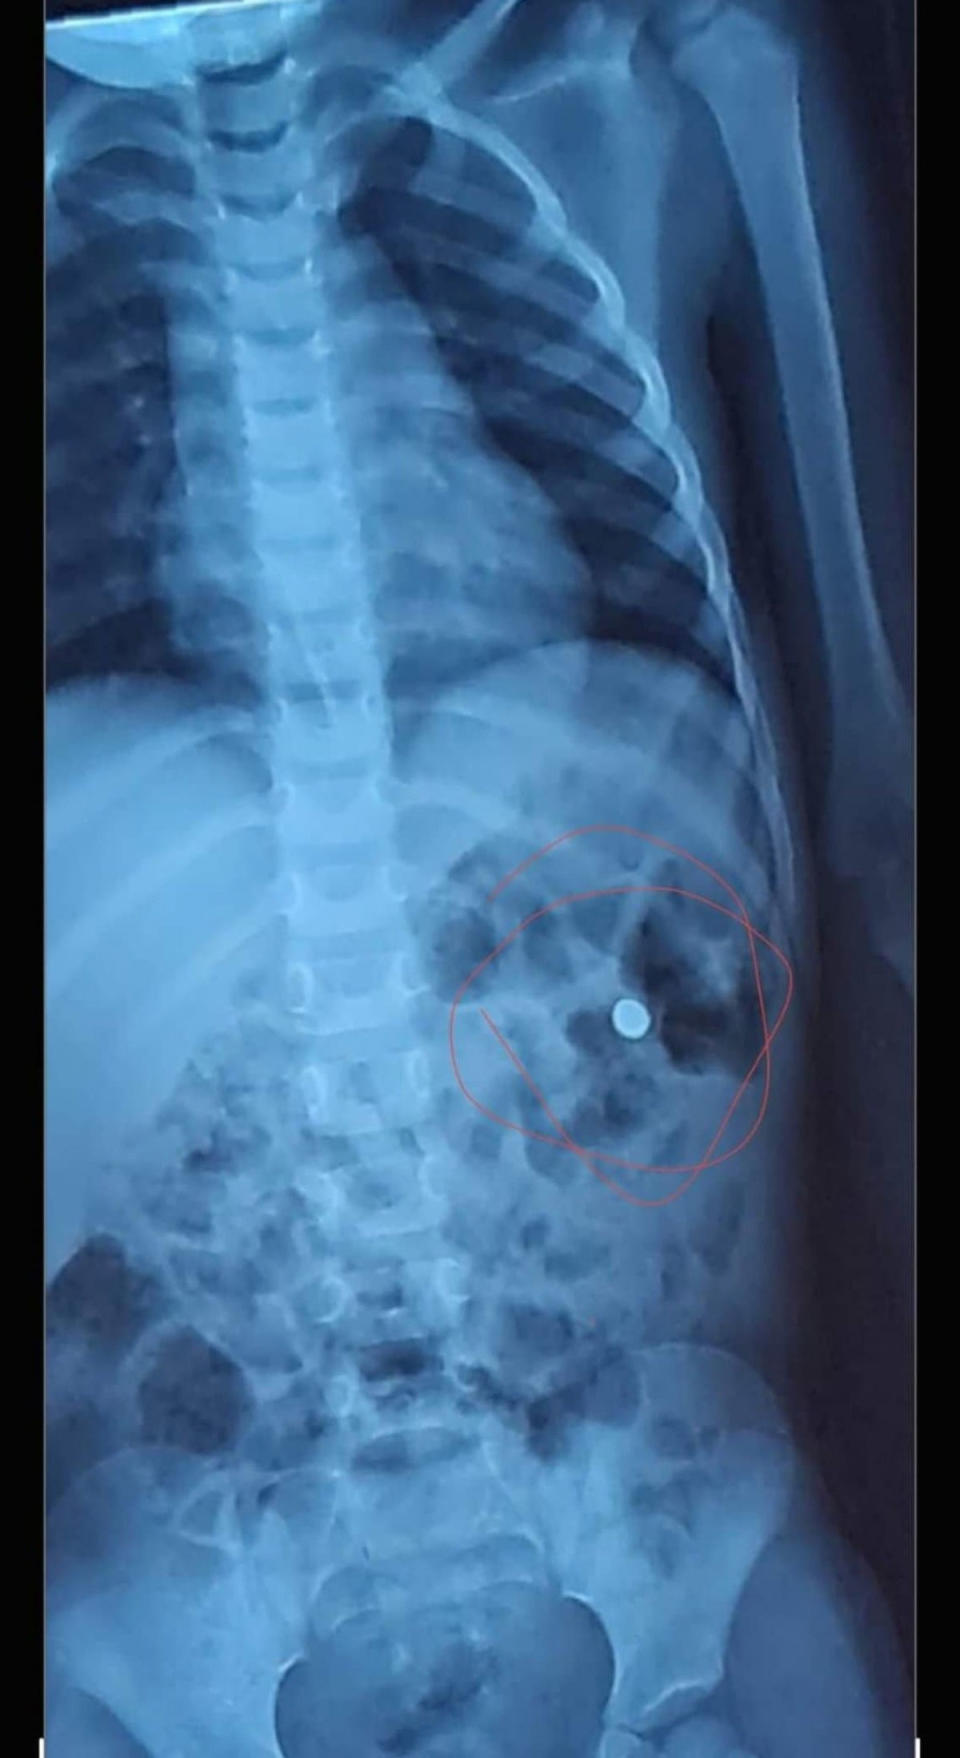 Pictured is the boy's x-ray which shows the battery inside.